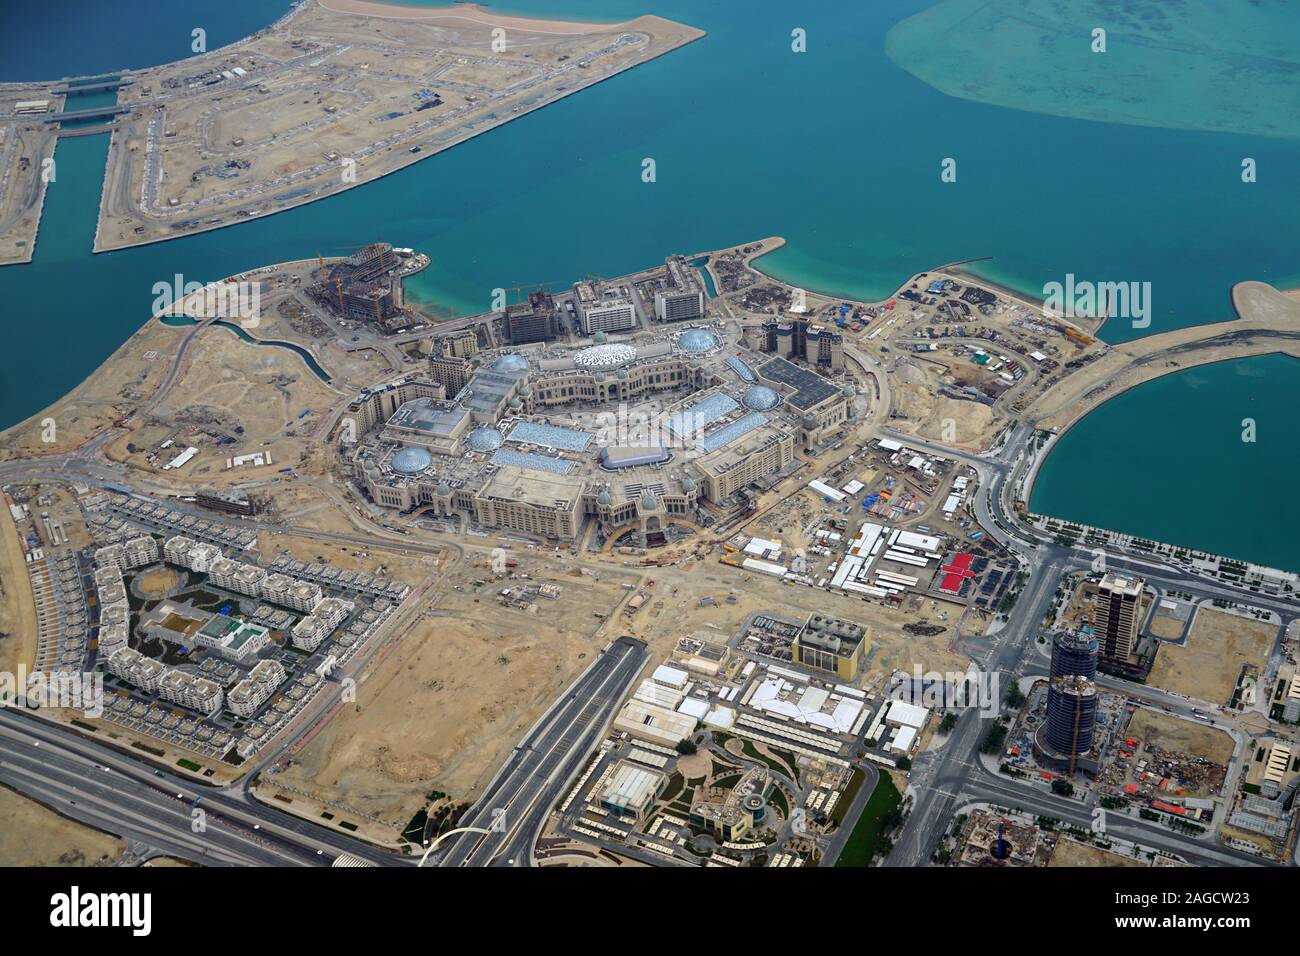 DOHA, QATAR -13 DEC 2019- Aerial view of the construction of the Place